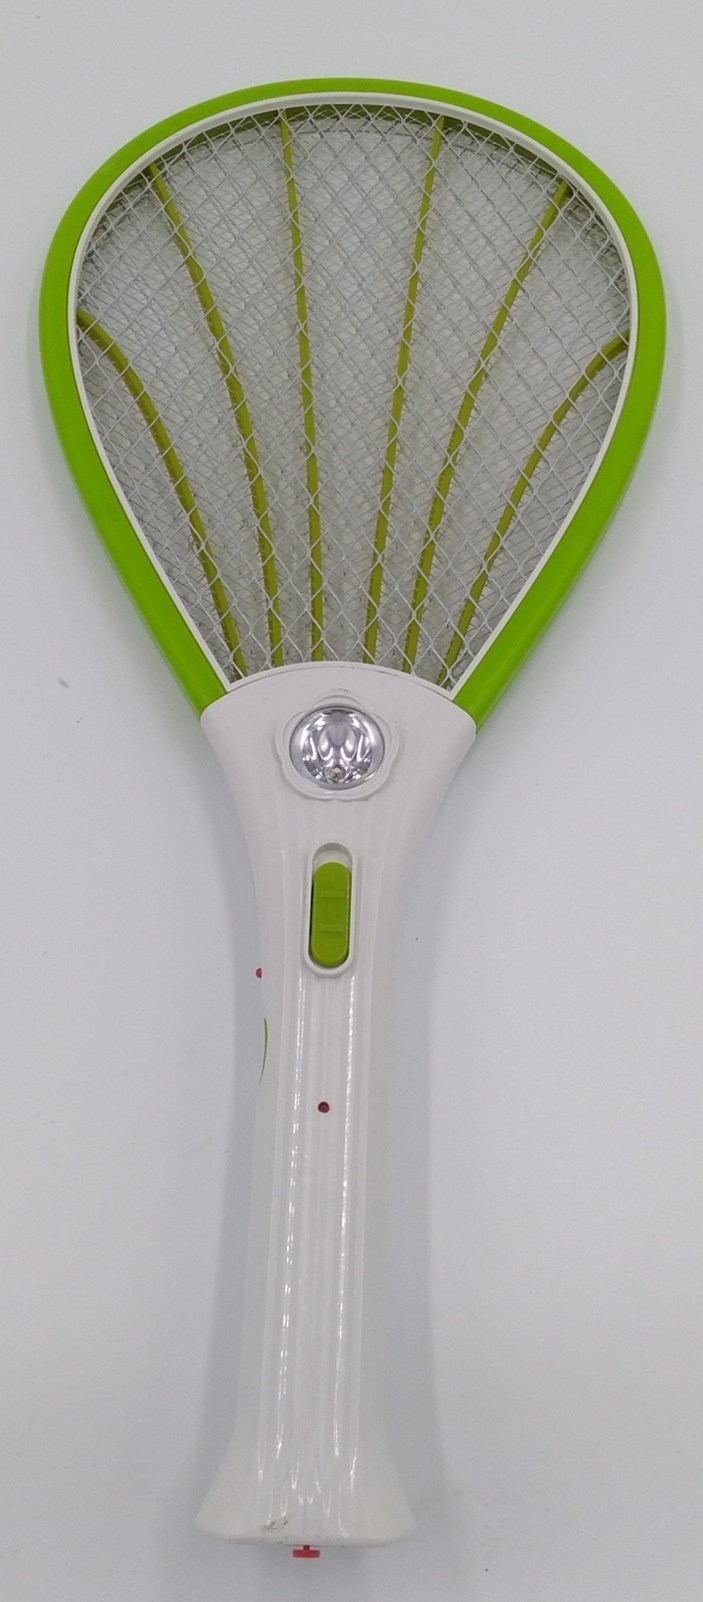 ABS Quality Electronic Mosquito Swatter Bug Racket for Camping